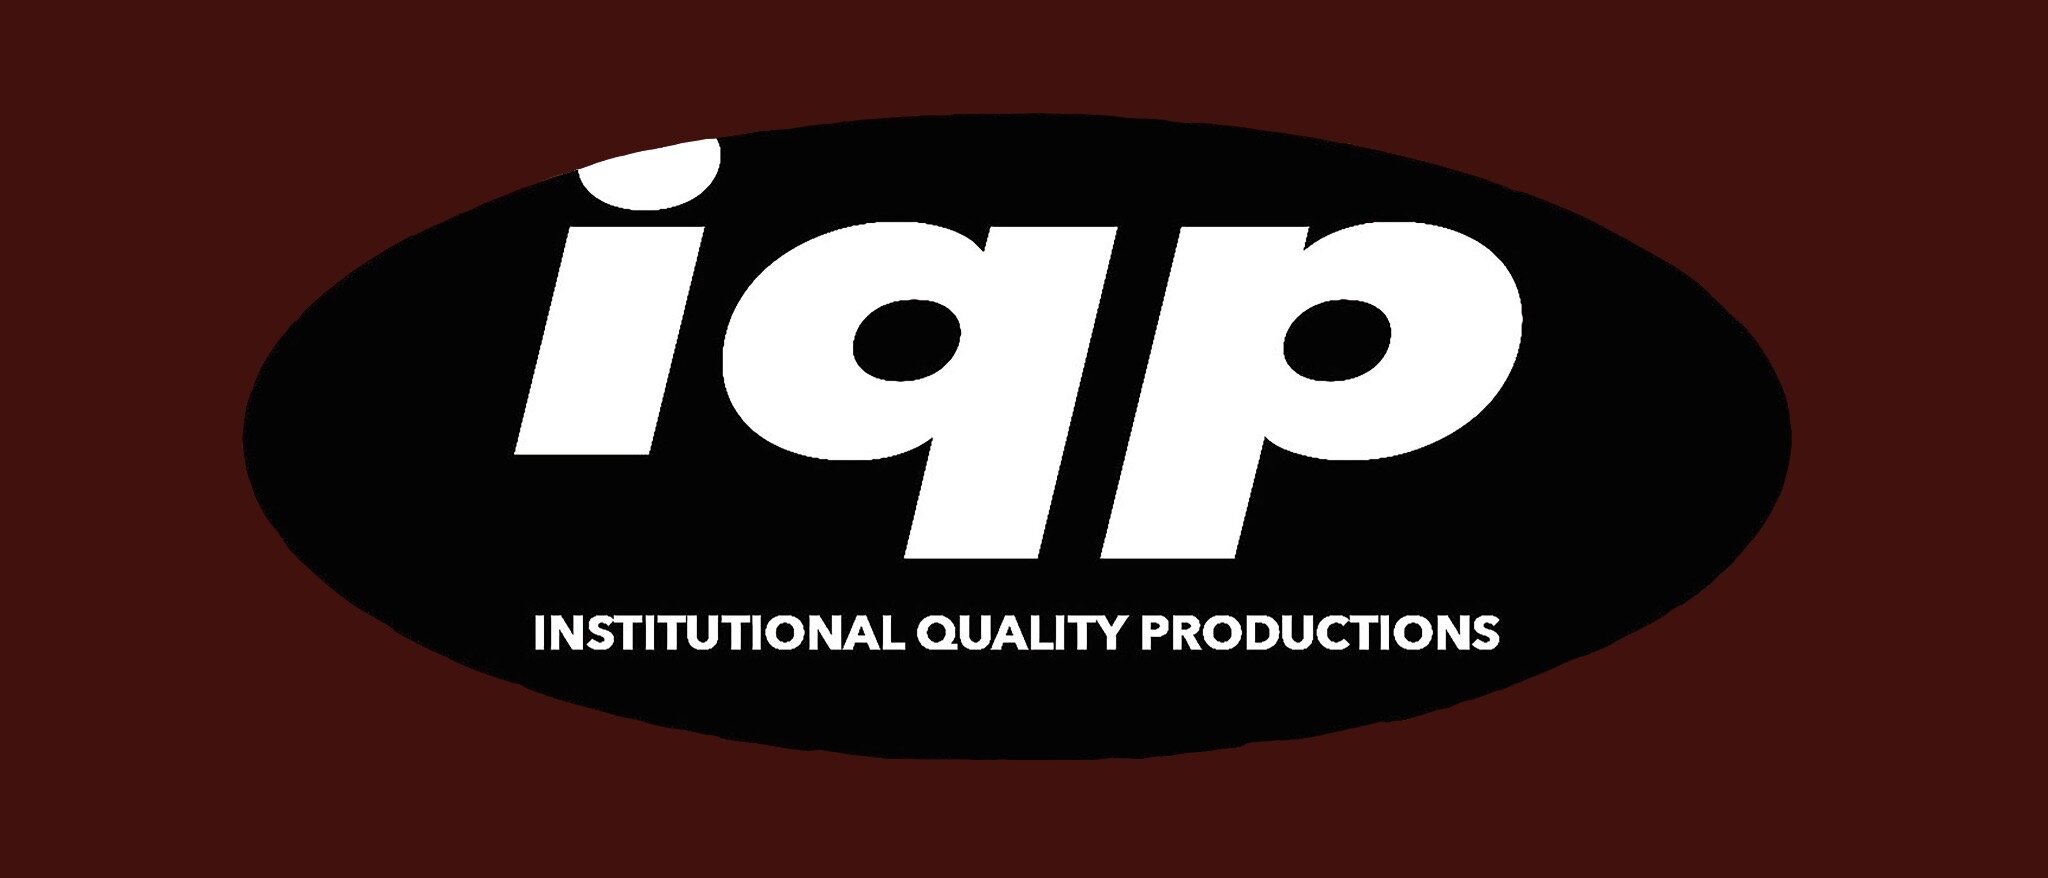 INSTITUTIONAL QUALITY PRODUCTIONS